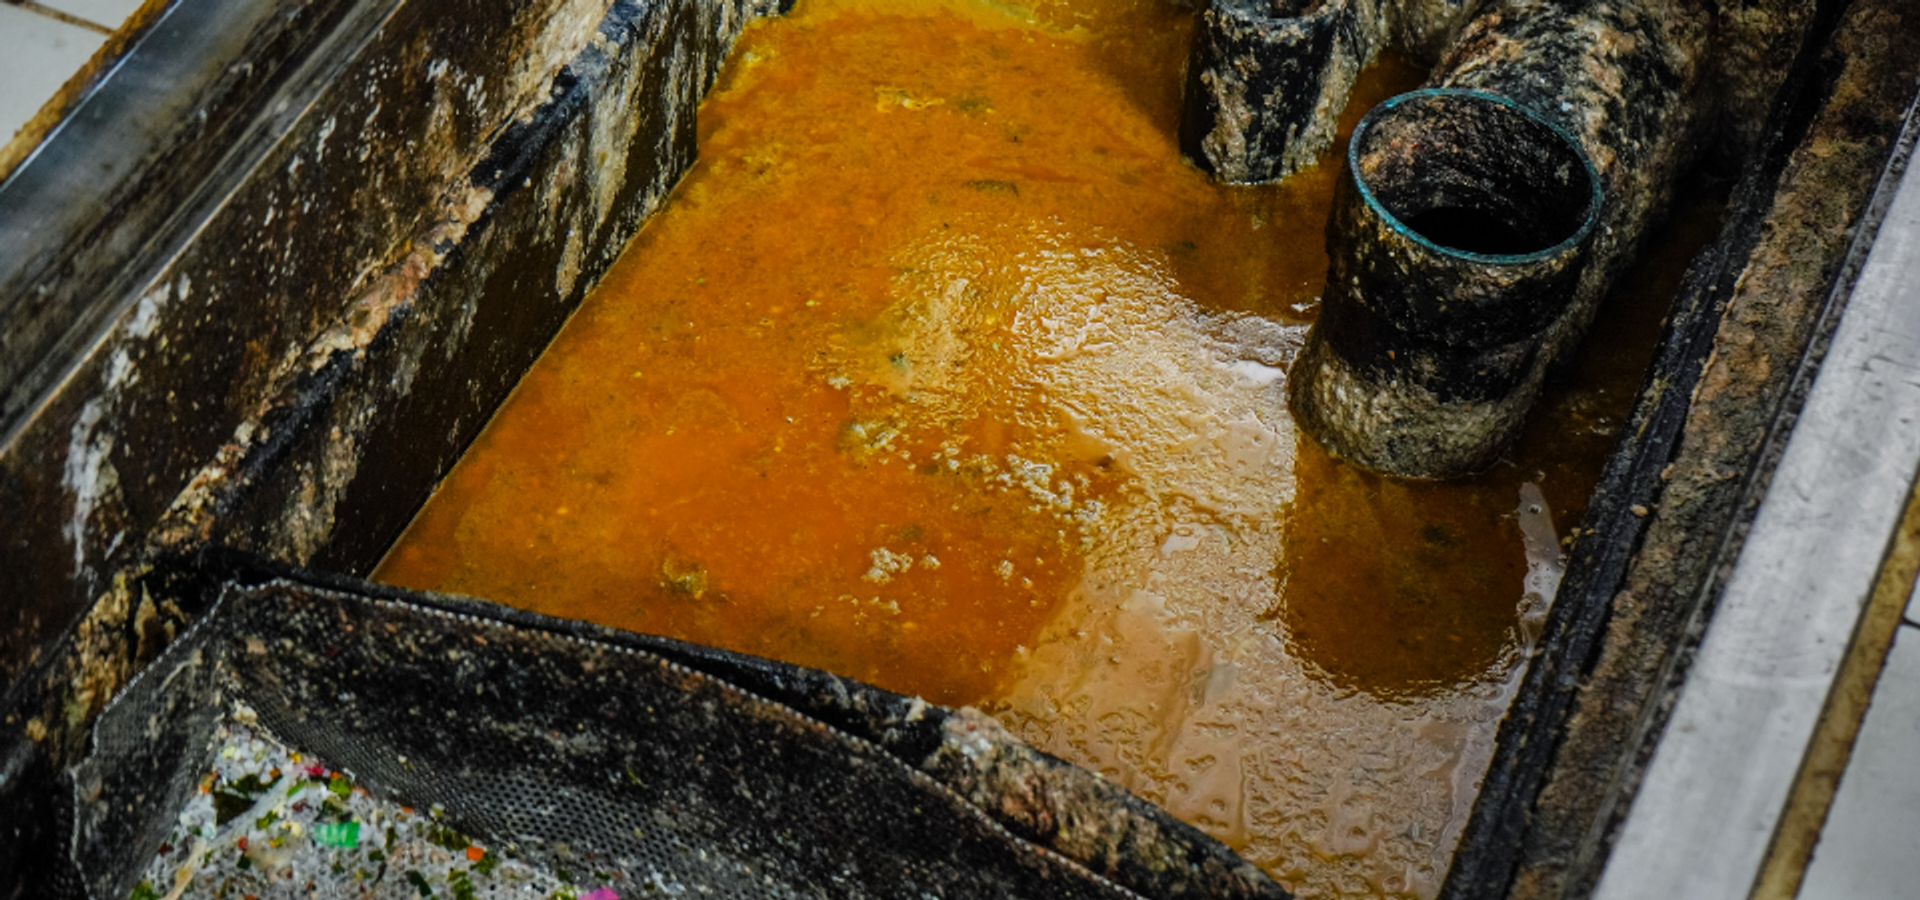 Challenges with Food Production Wastewater